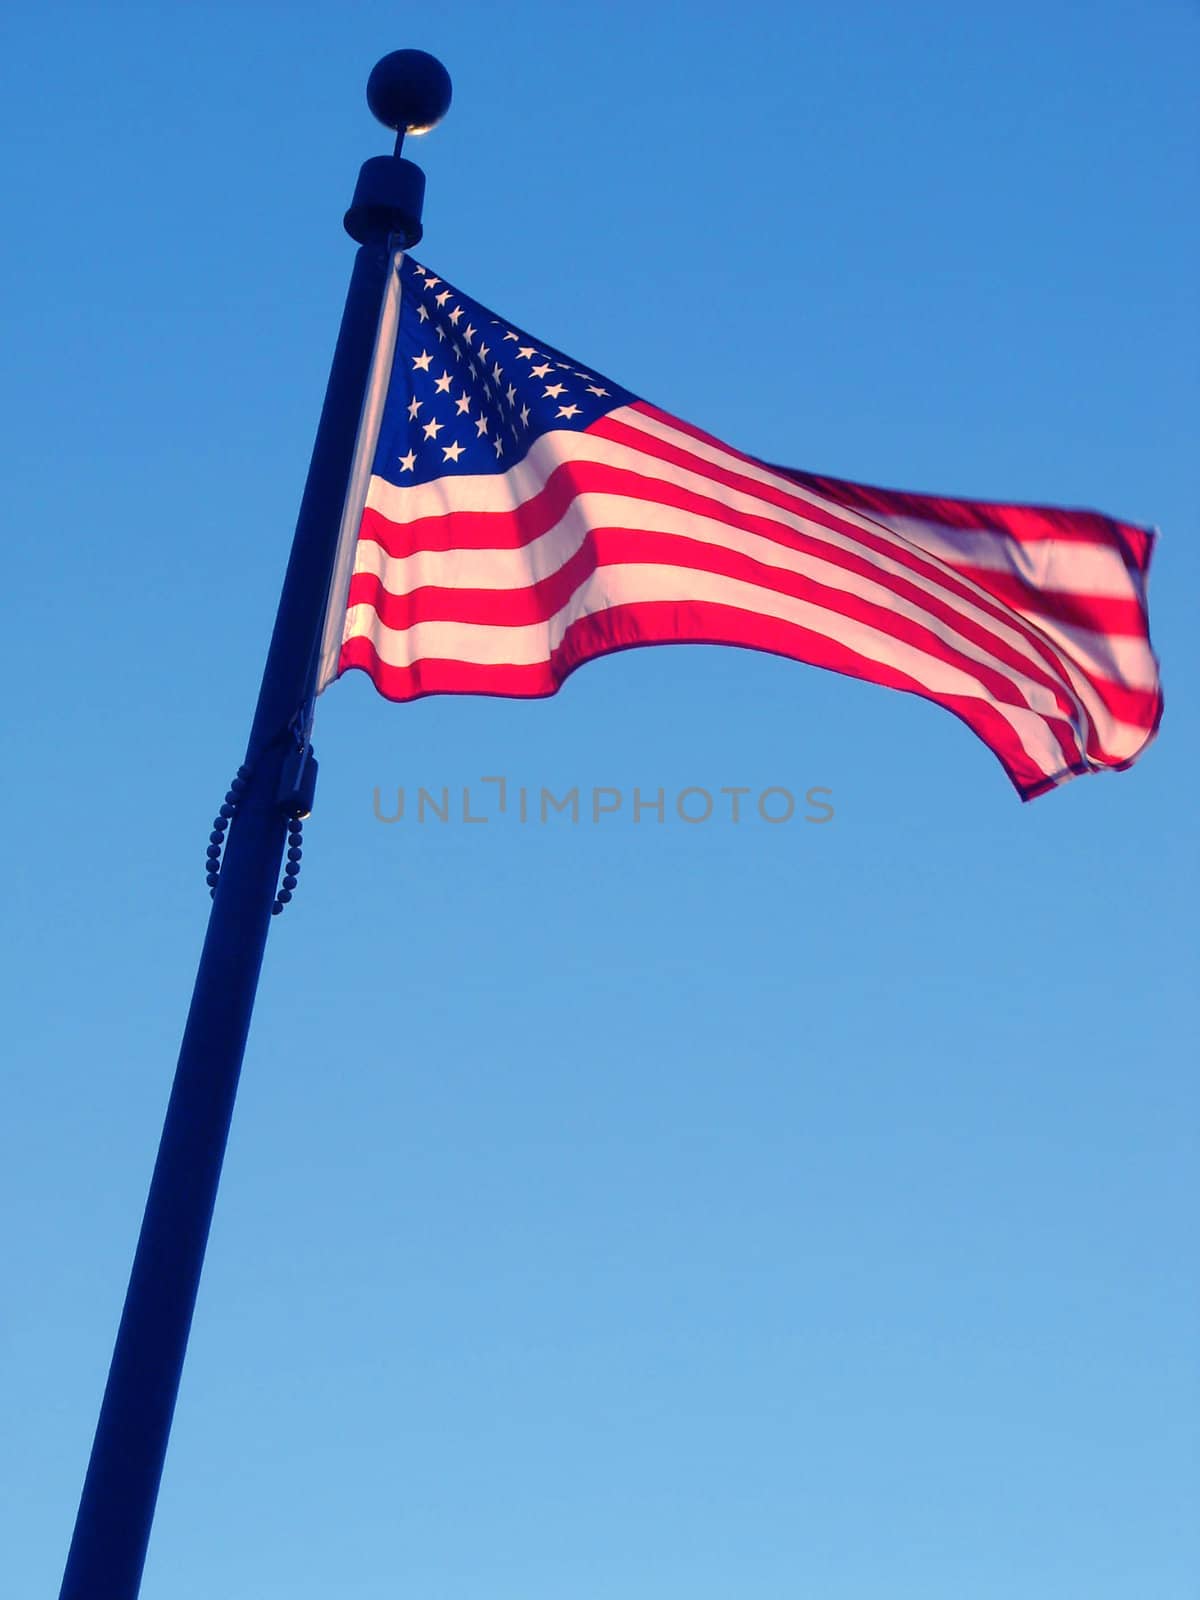 American flag 2 by Thorvis